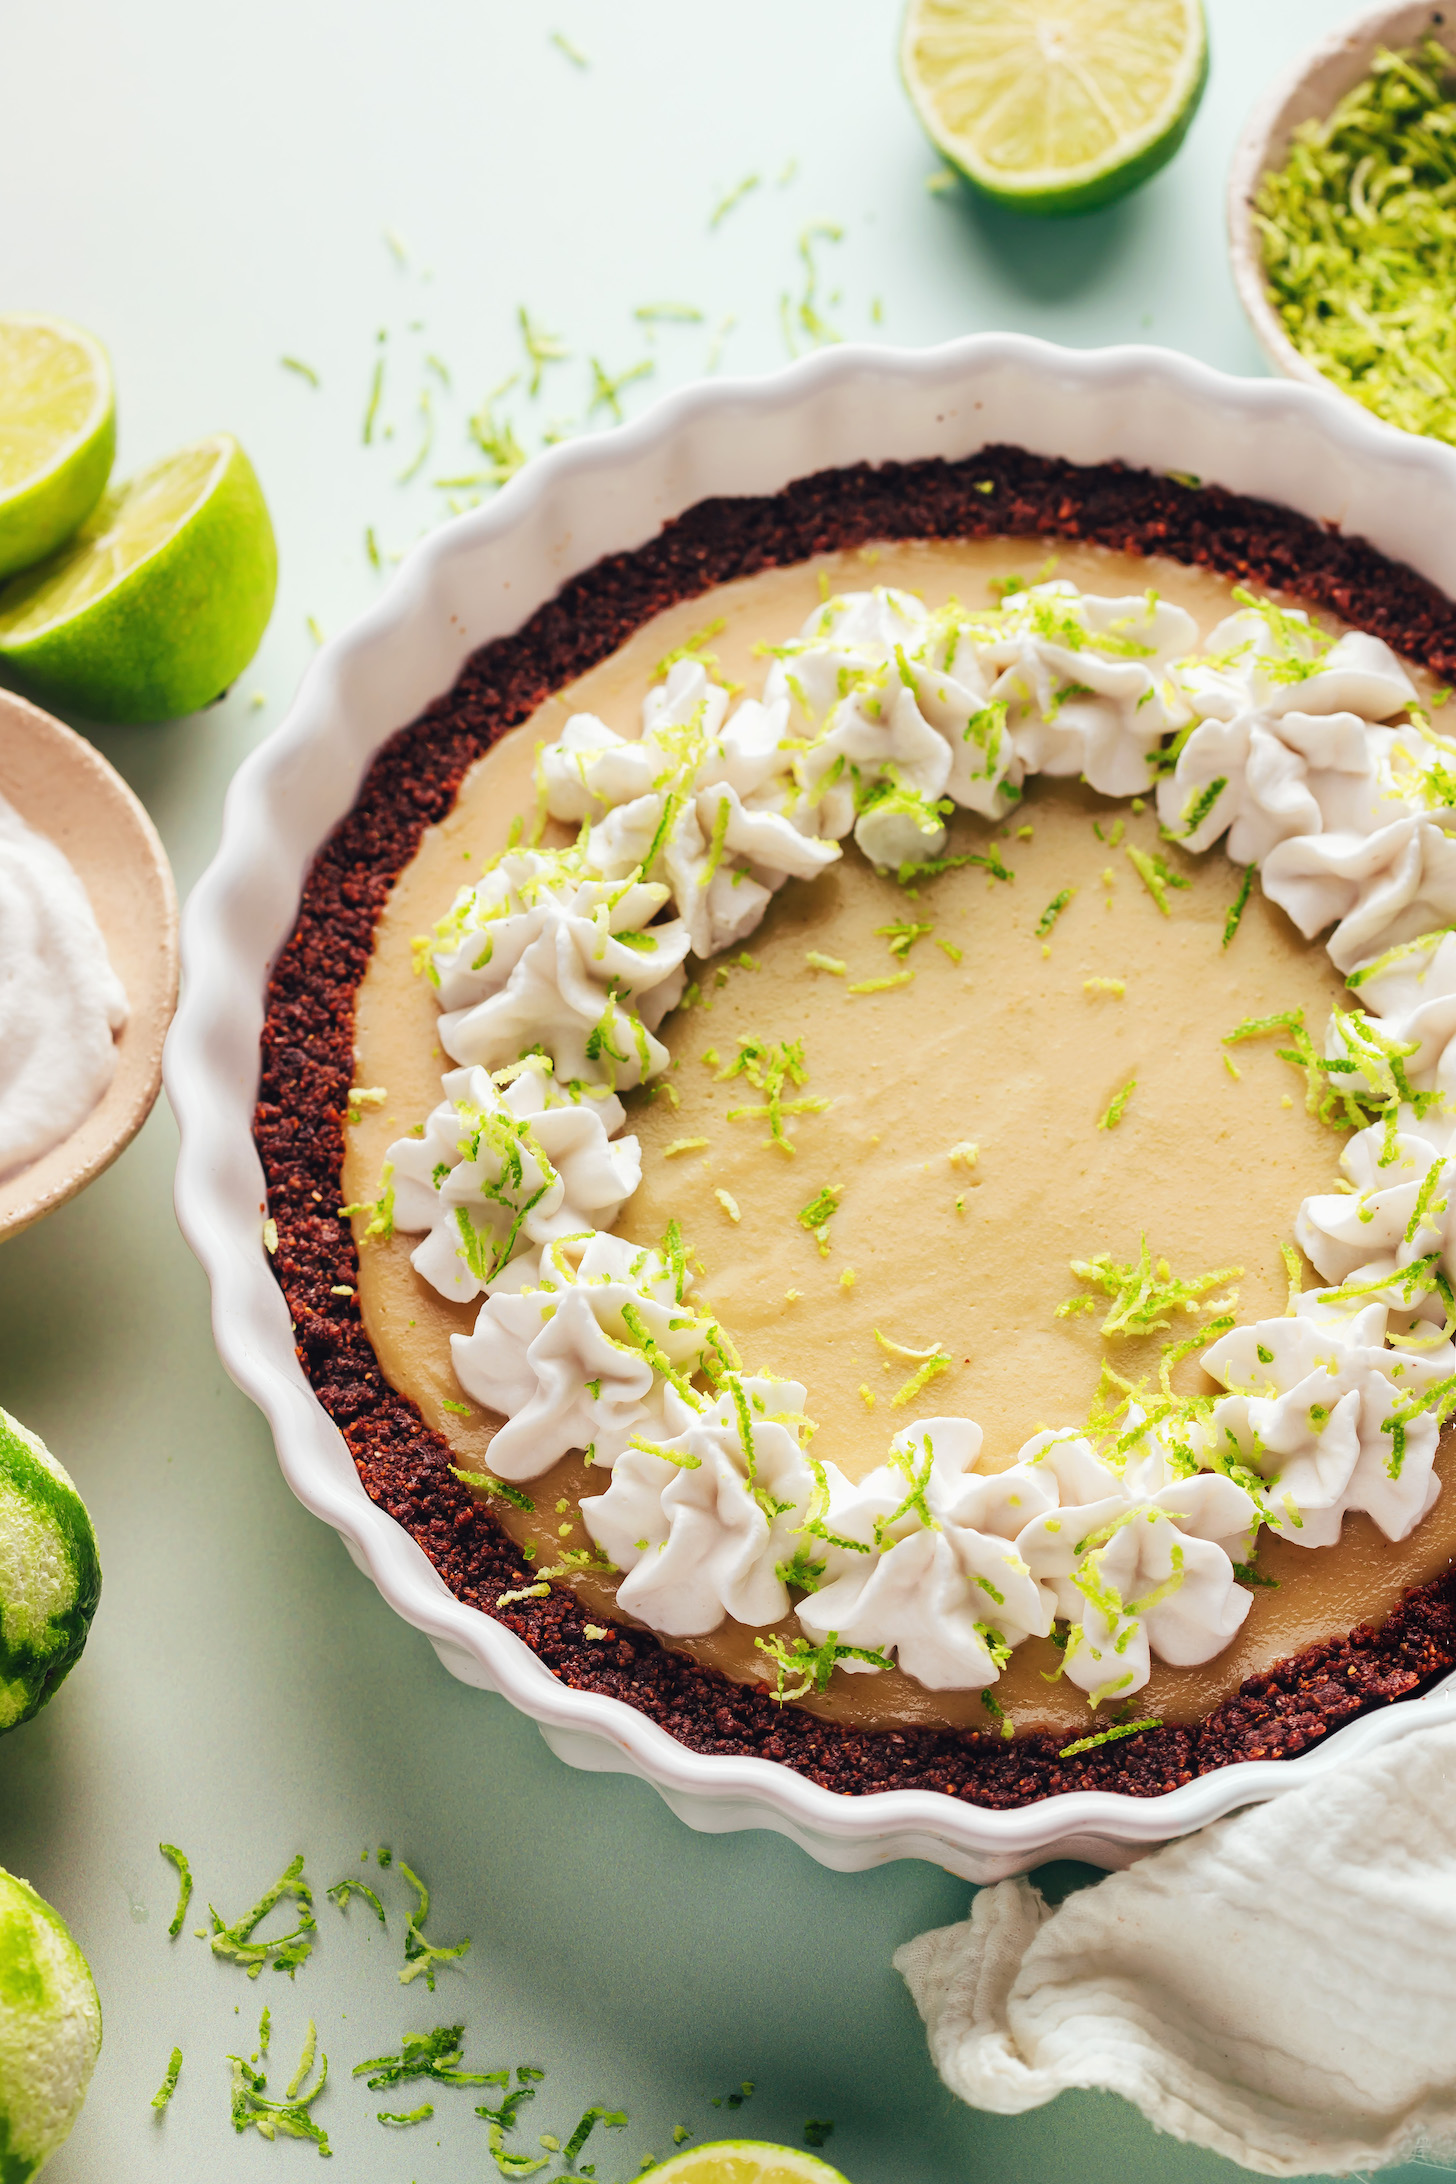 Limes and cashew whipped cream next to a pie plate filled with vegan key lime pie